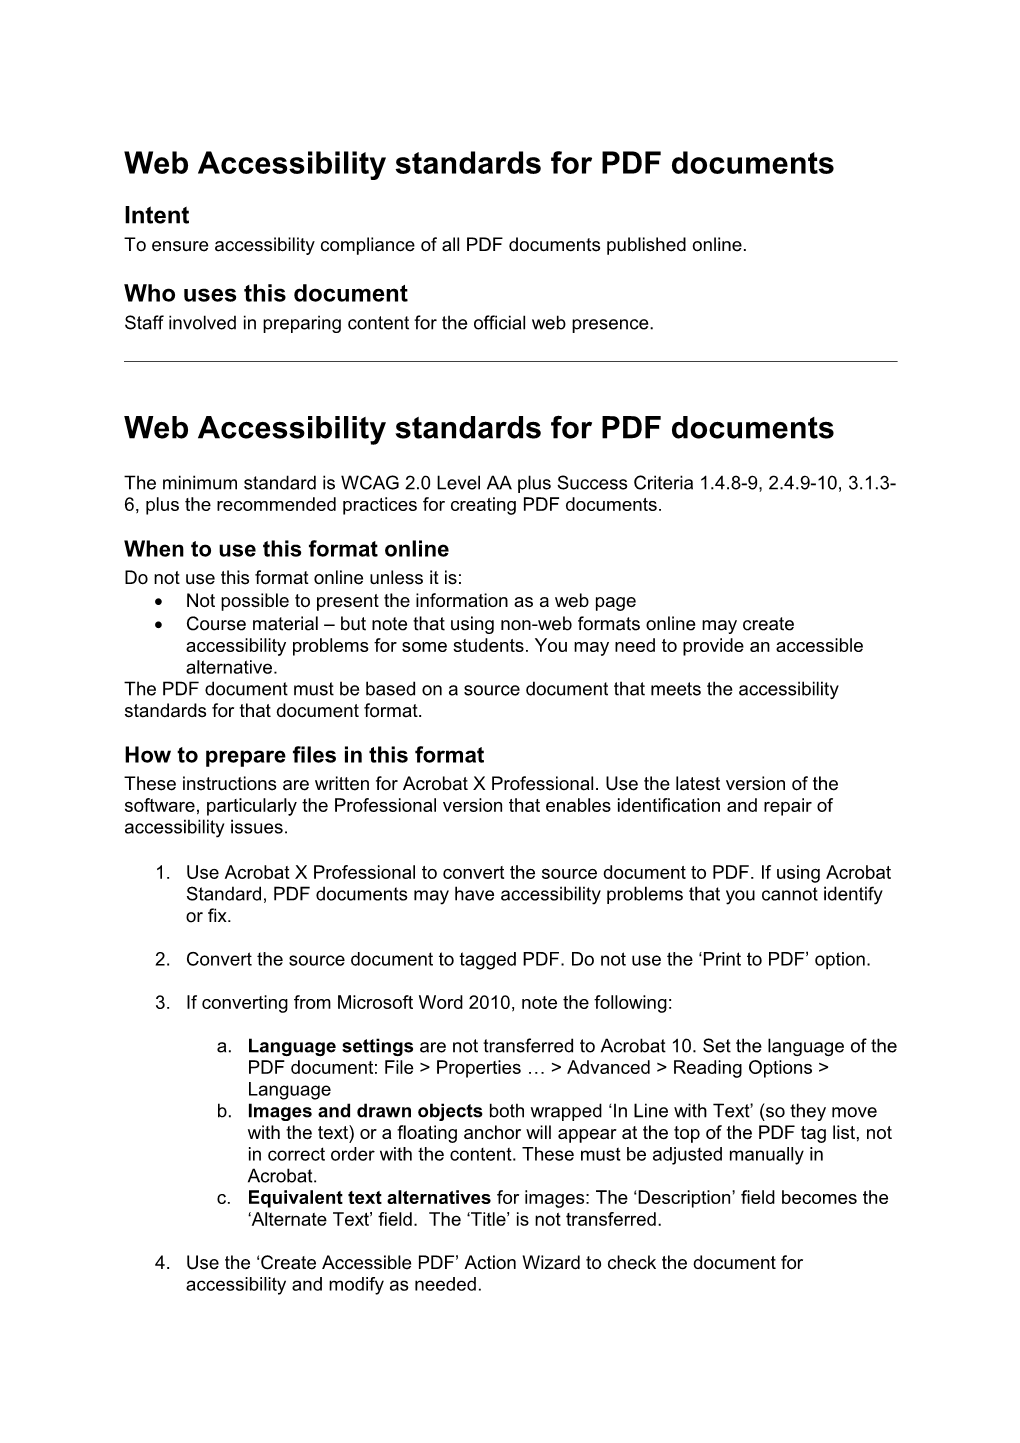 Web Accessibility Standards for PDF Documents